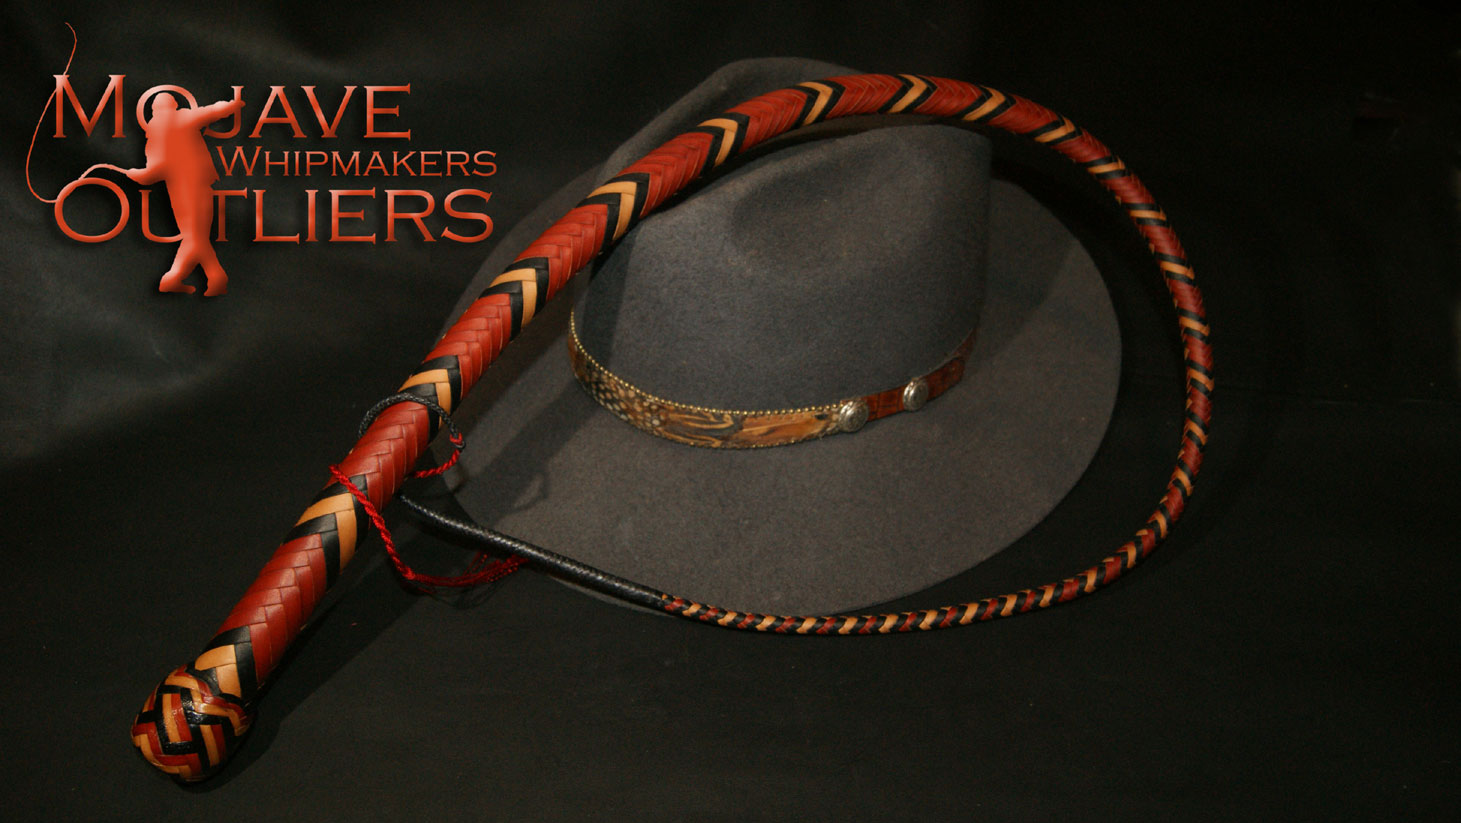 Mojave Outliers Whipmakers 3.5ft 16 plait signal whip roan black & natural kangaroo leather